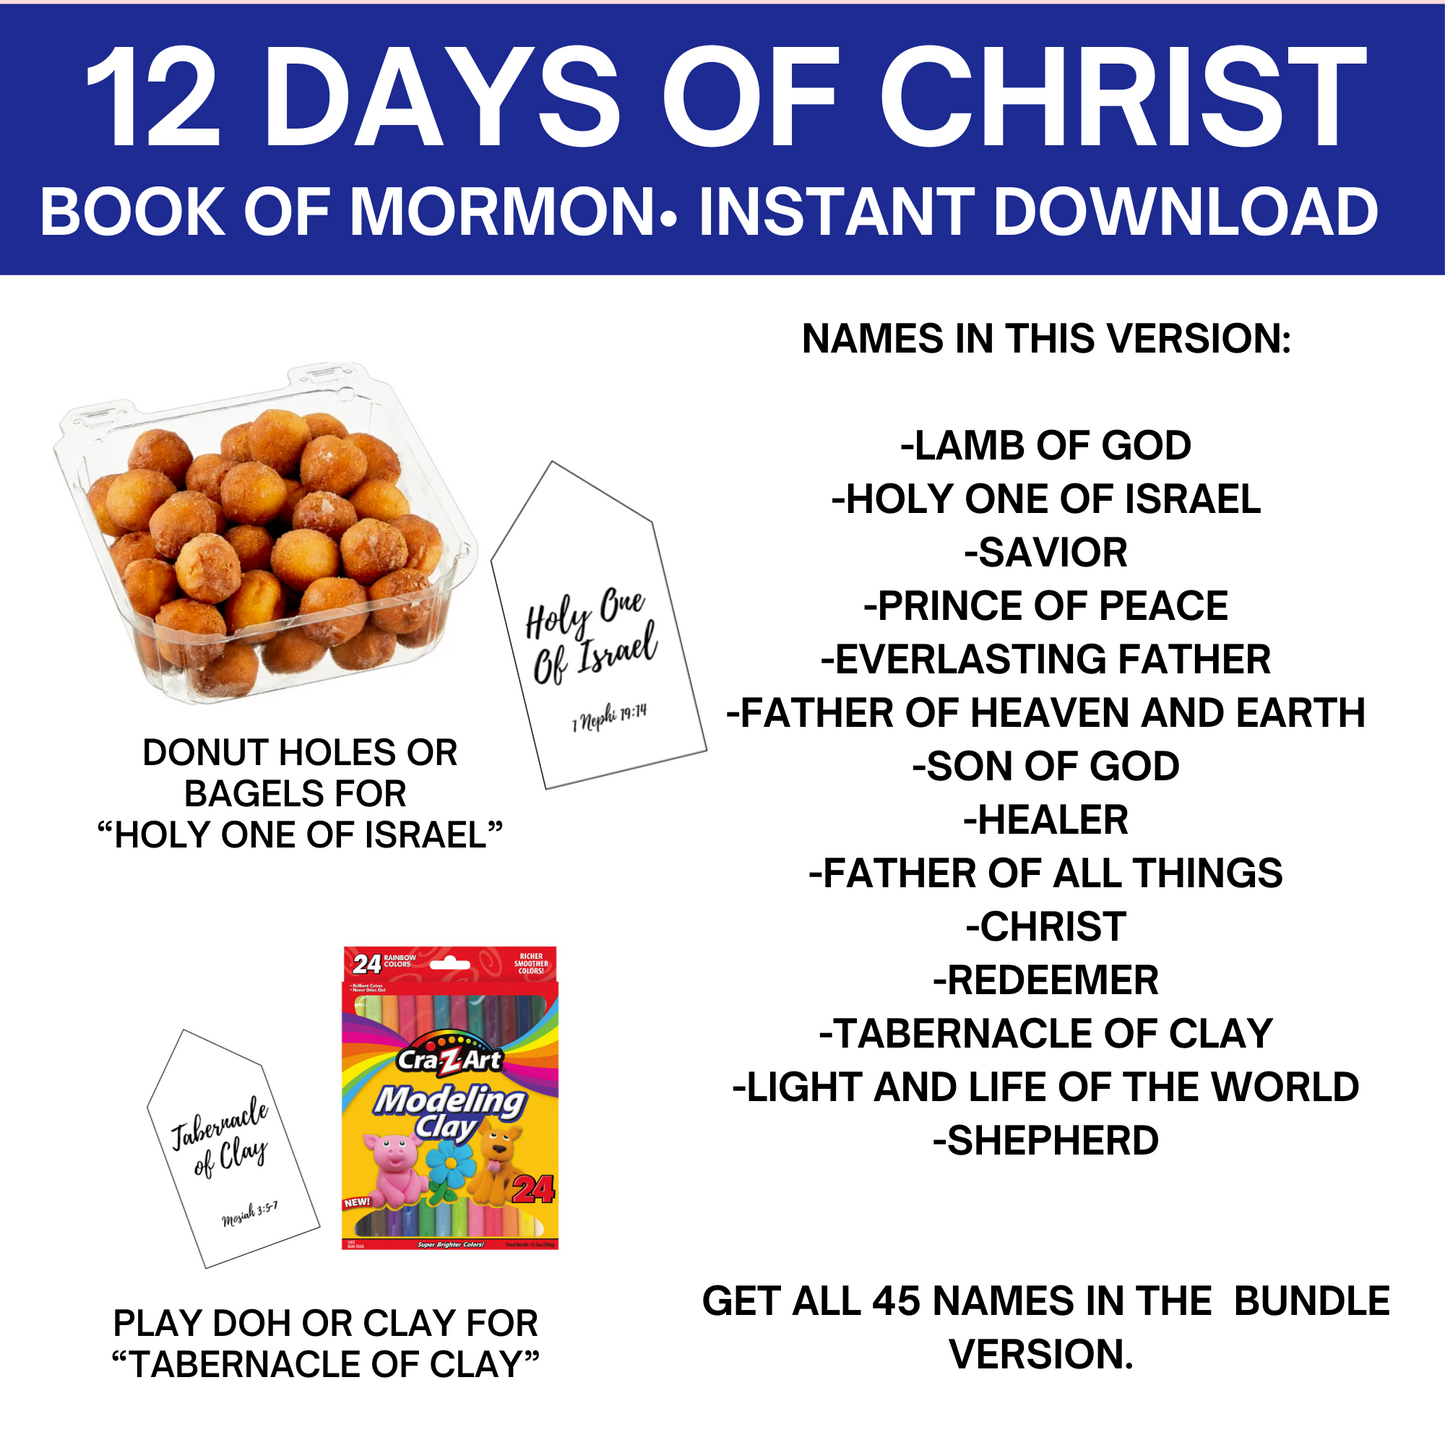 12 Days of Christ- Book of Mormon (14 Names of Christ)